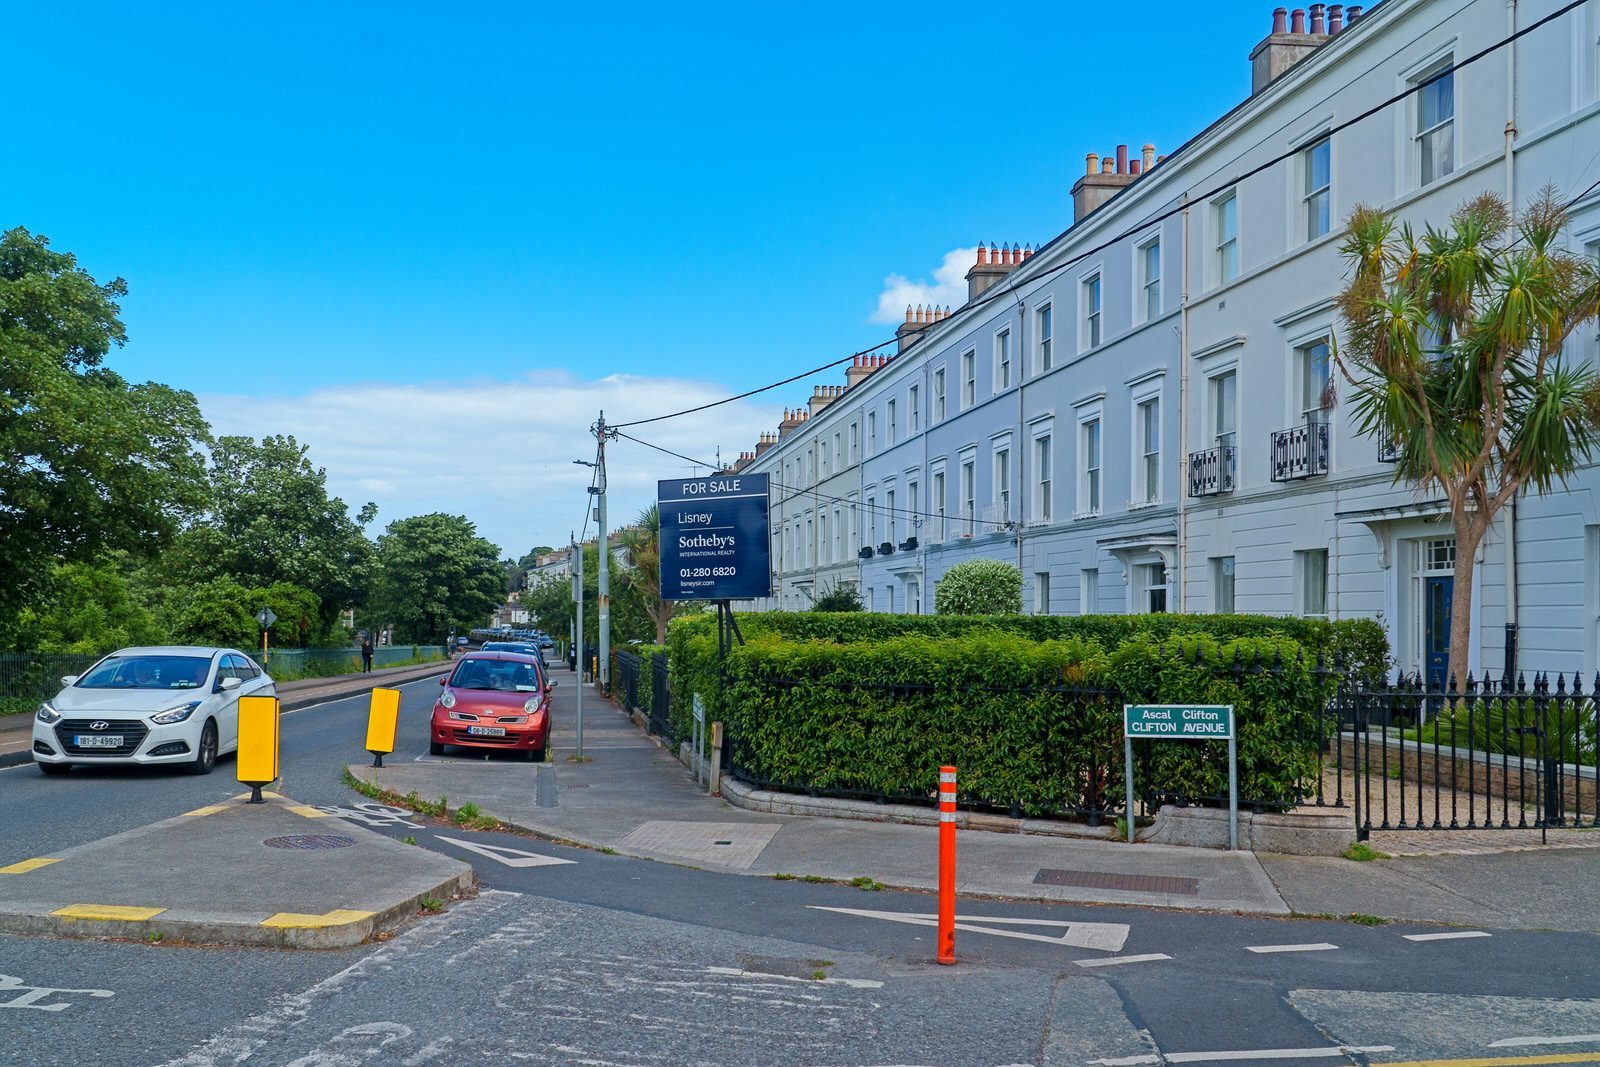 LONGFORD TERRACE AND CLOSE BY [SALTHILL AND MONKSTOWN TRAIN STATION] 004